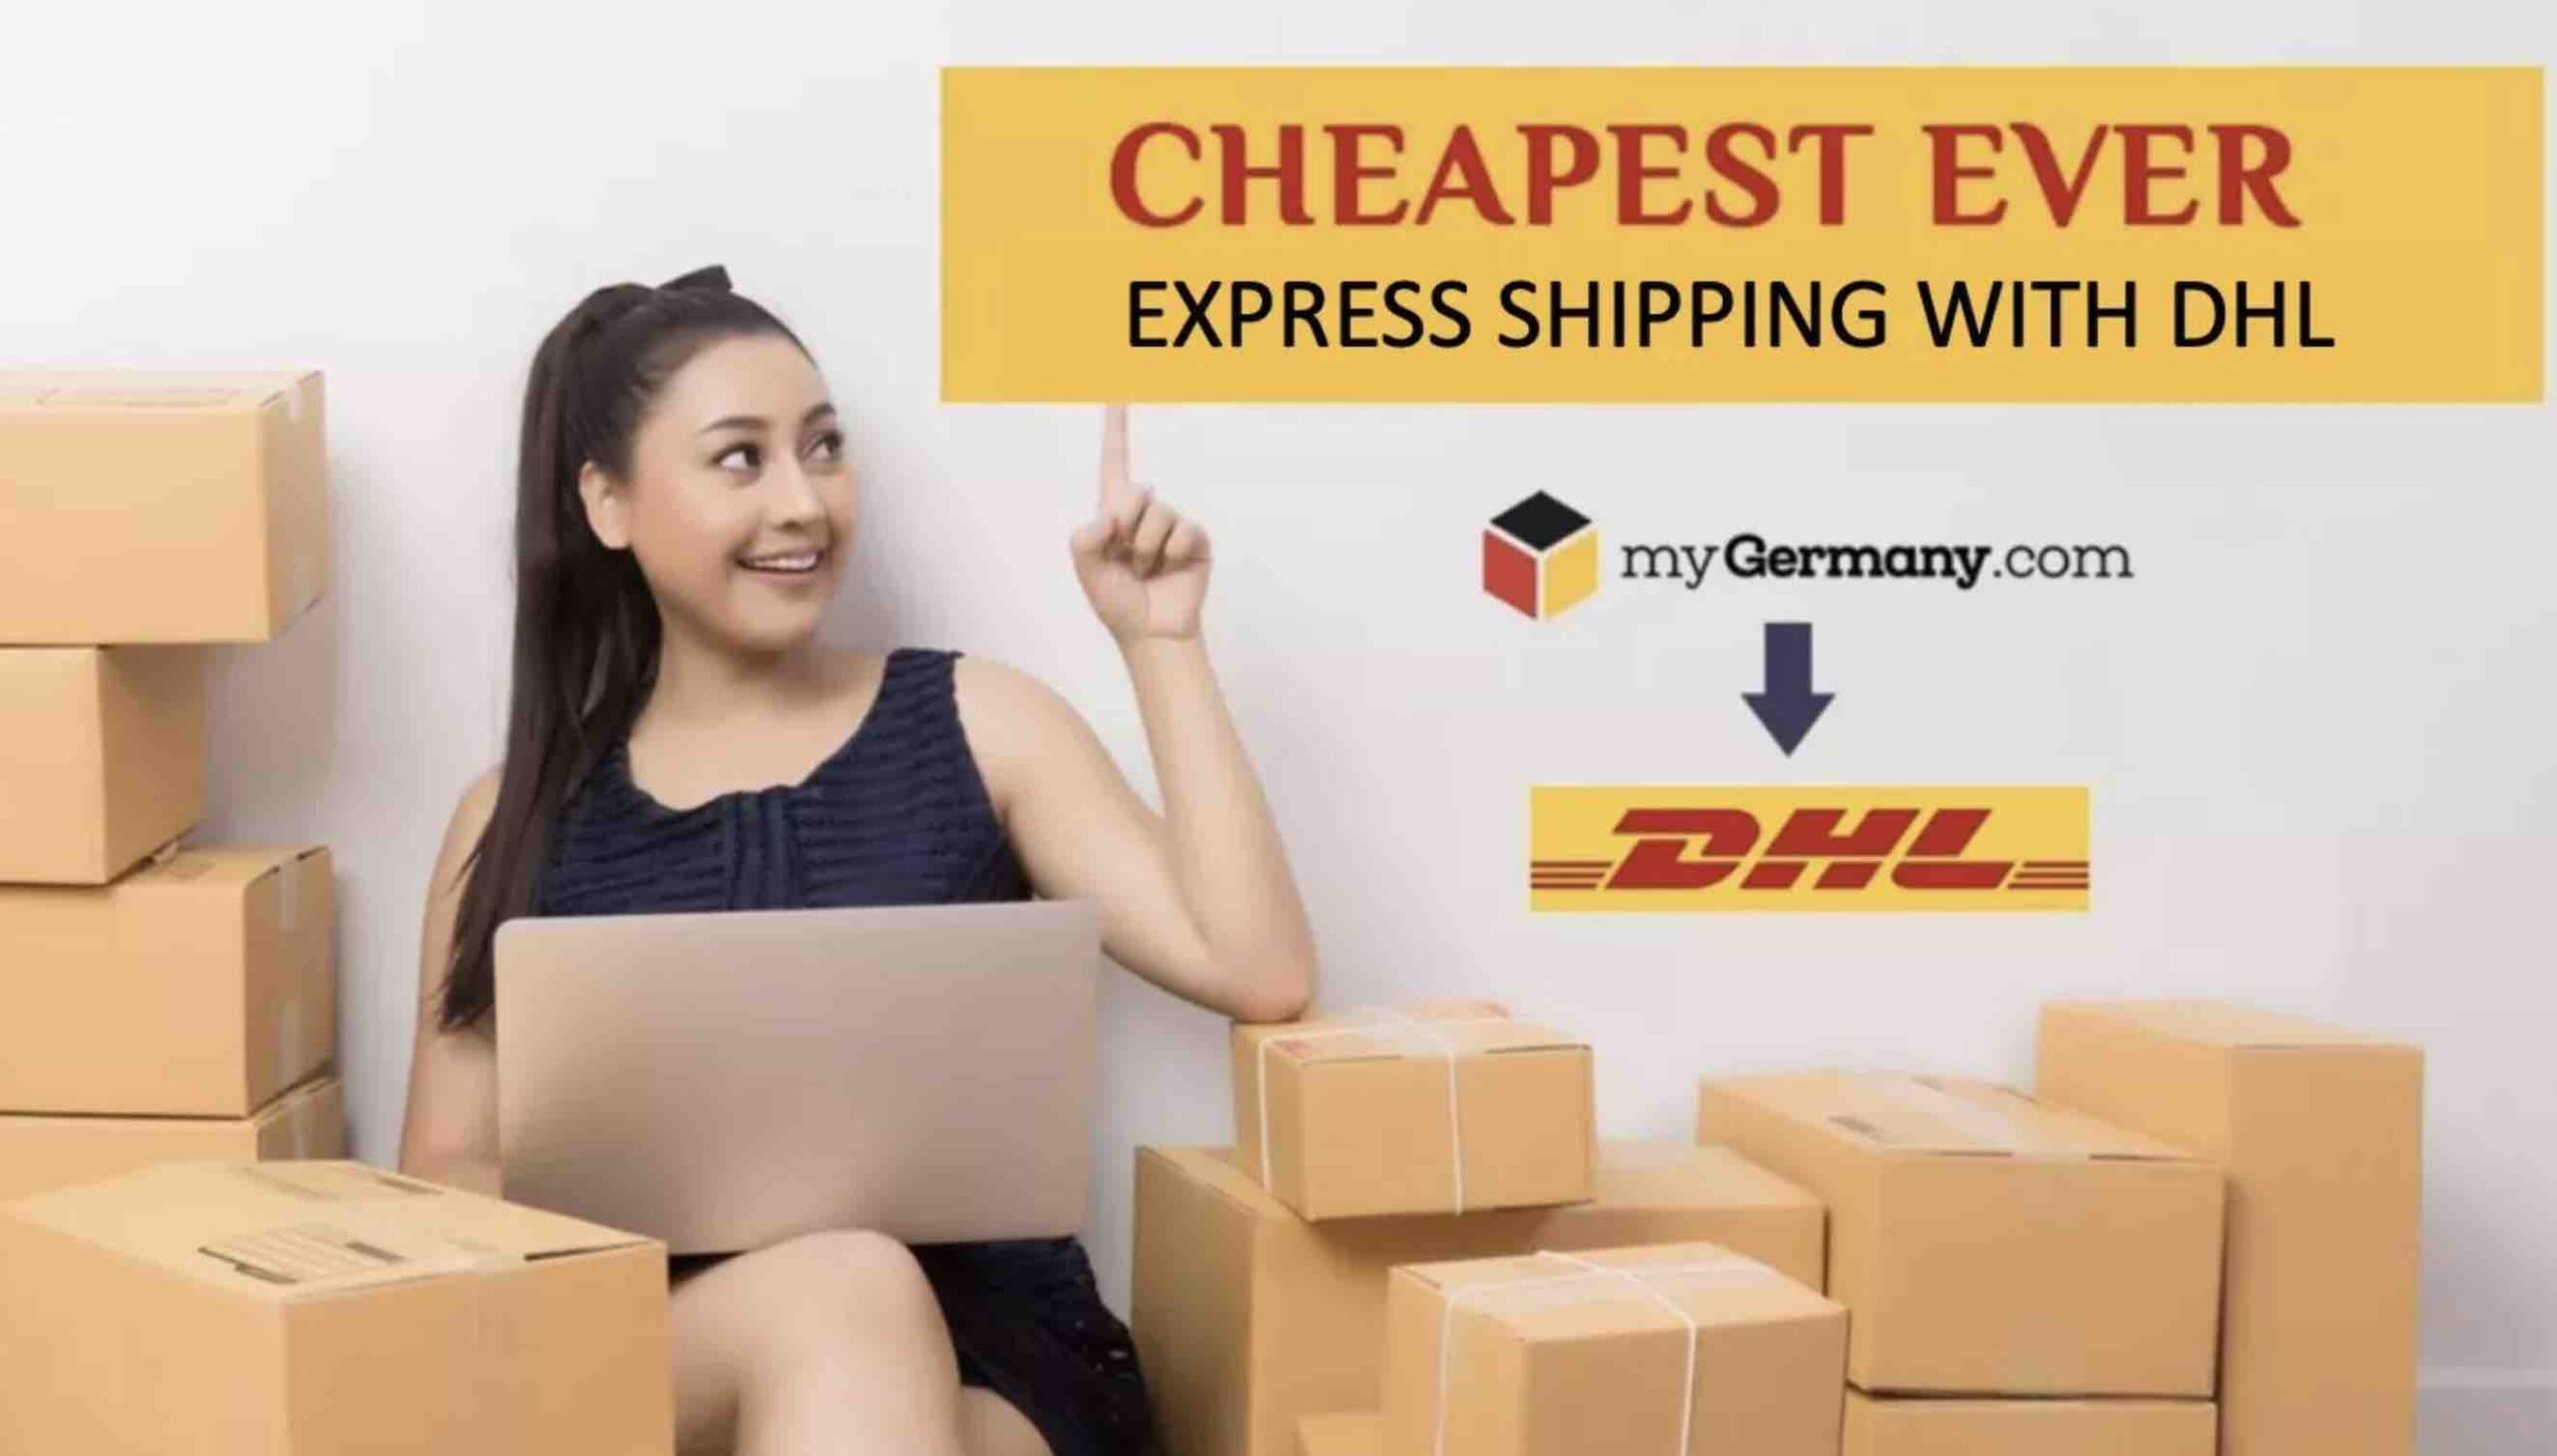 myGermany offers new low international DHL EXPRESS shipping rates ...